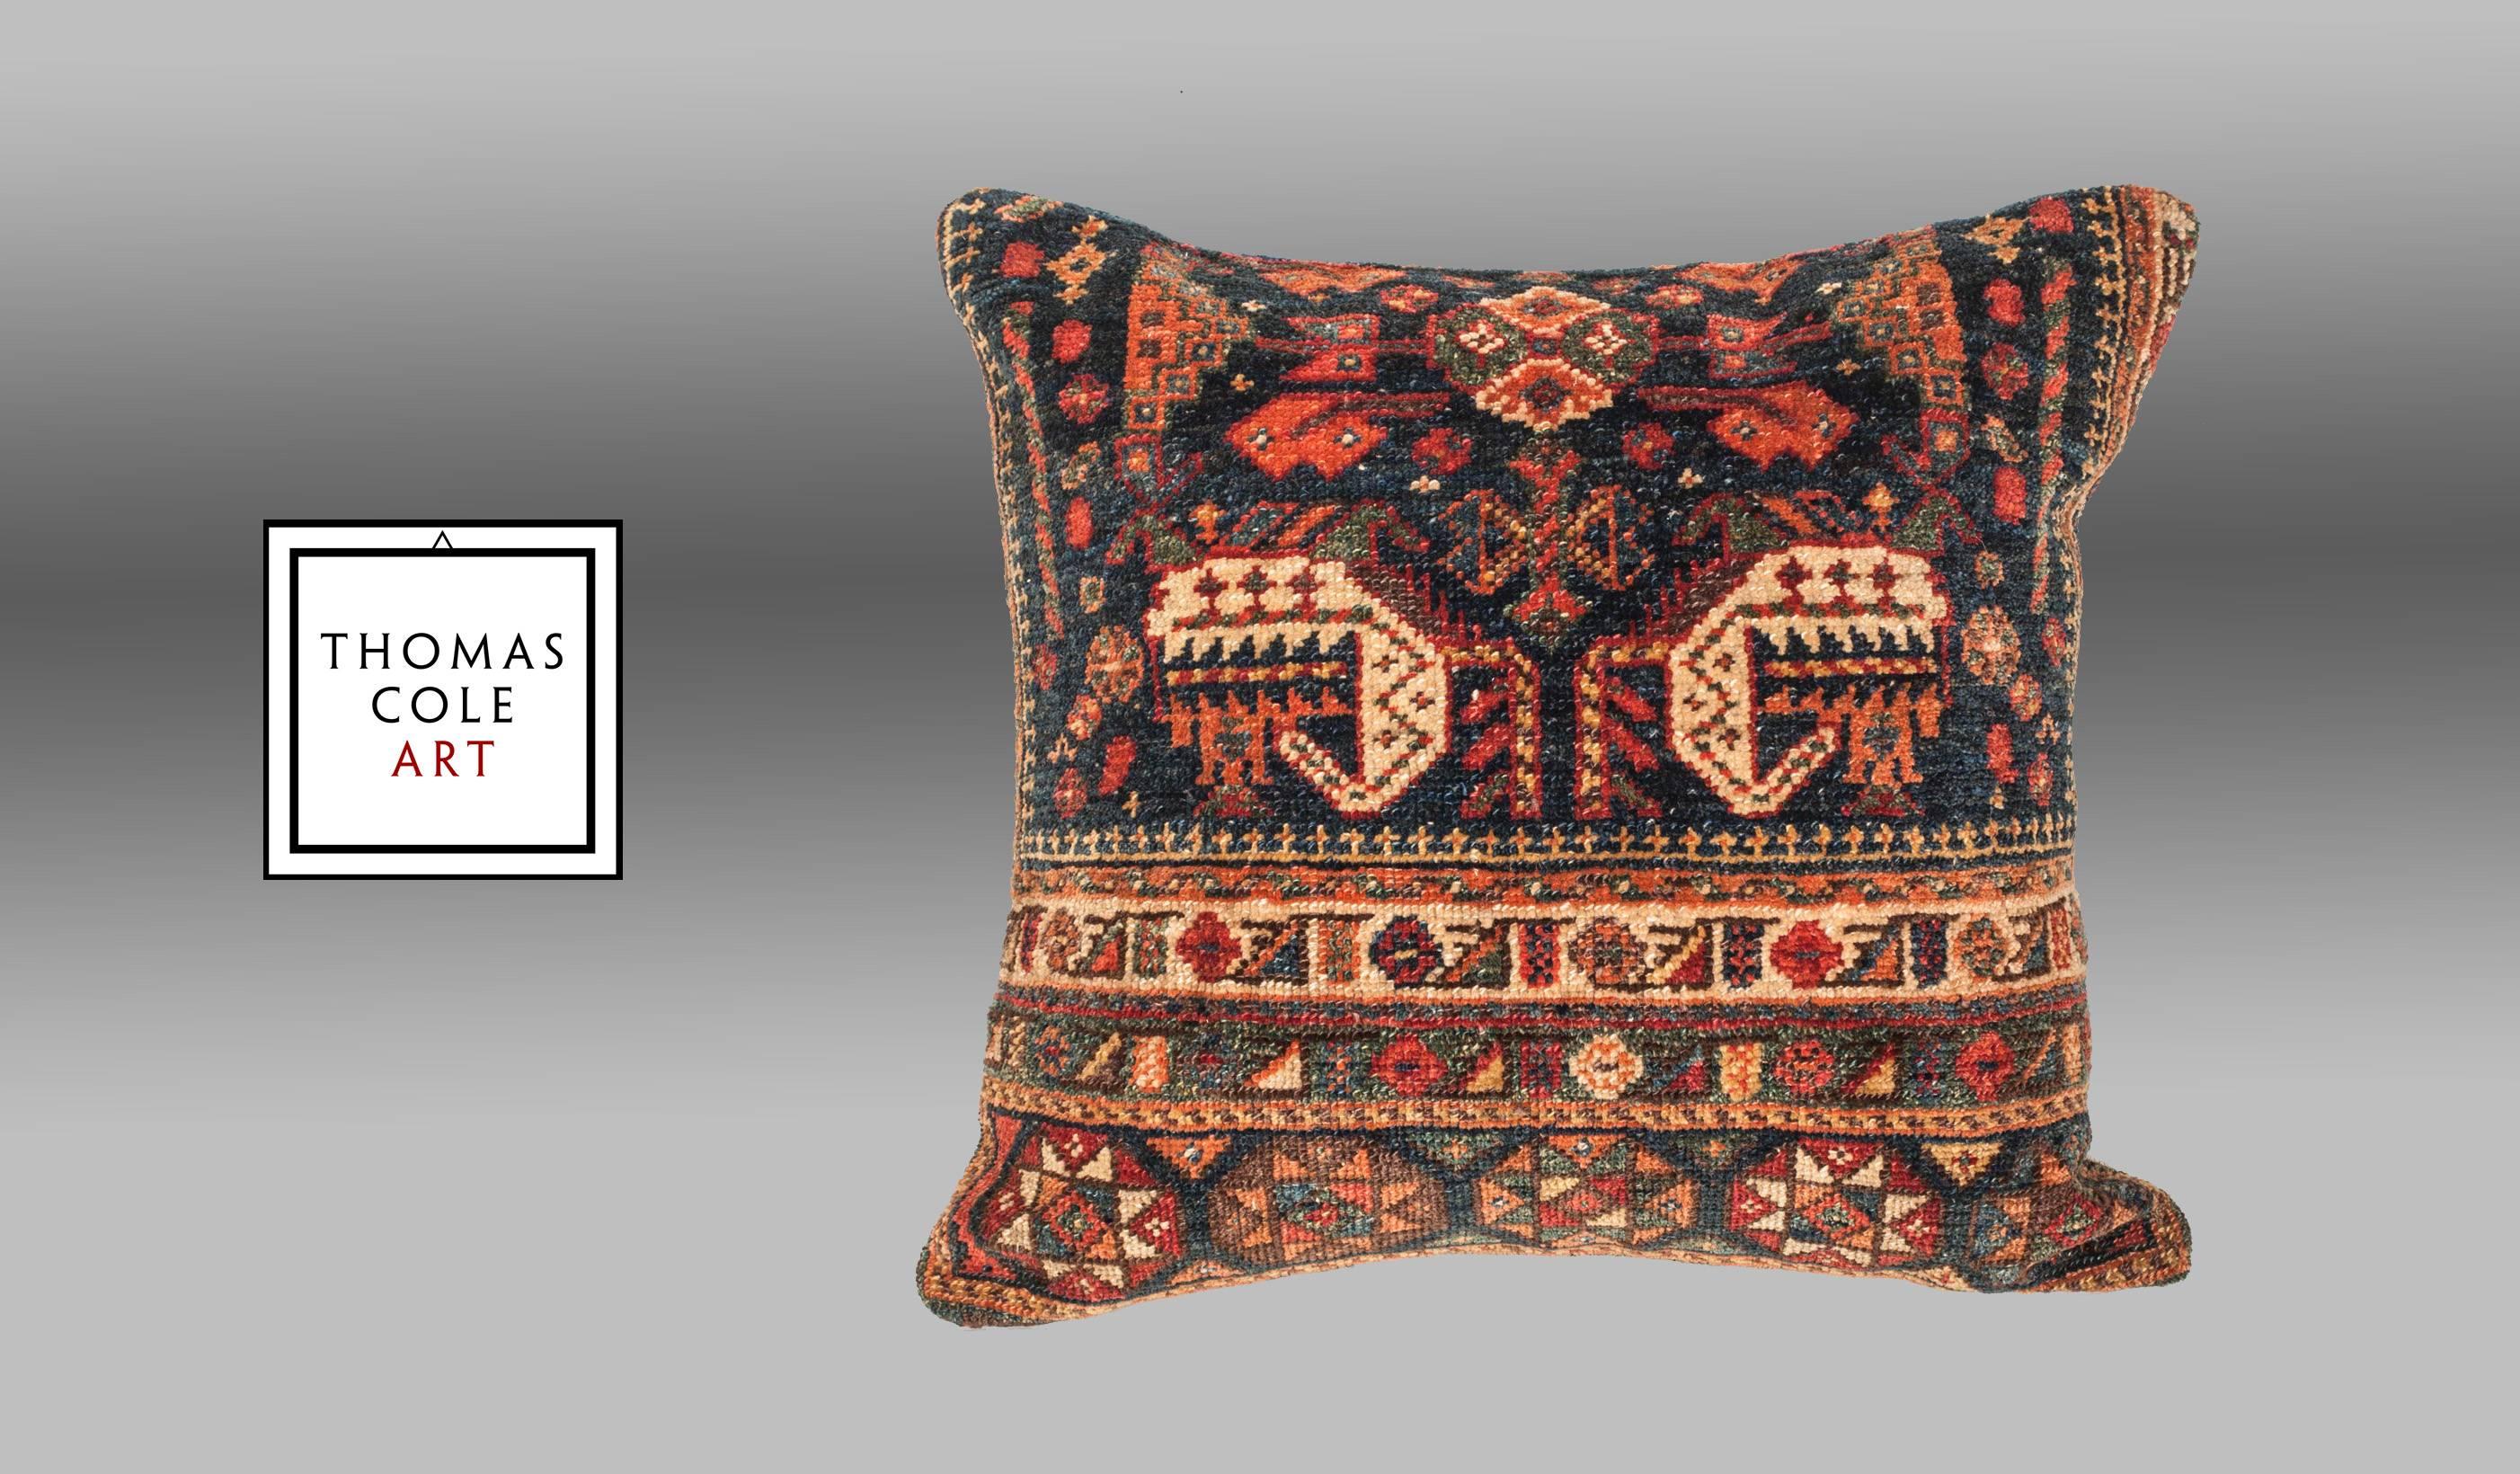 A pillow fashioned from an antique Luri rug from south Persia, dating to the late 19th century.   

It comes with an insert to accommodate filling.

FILLING NOT PROVIDED

The condition is good, with no holes, repair or stains.
